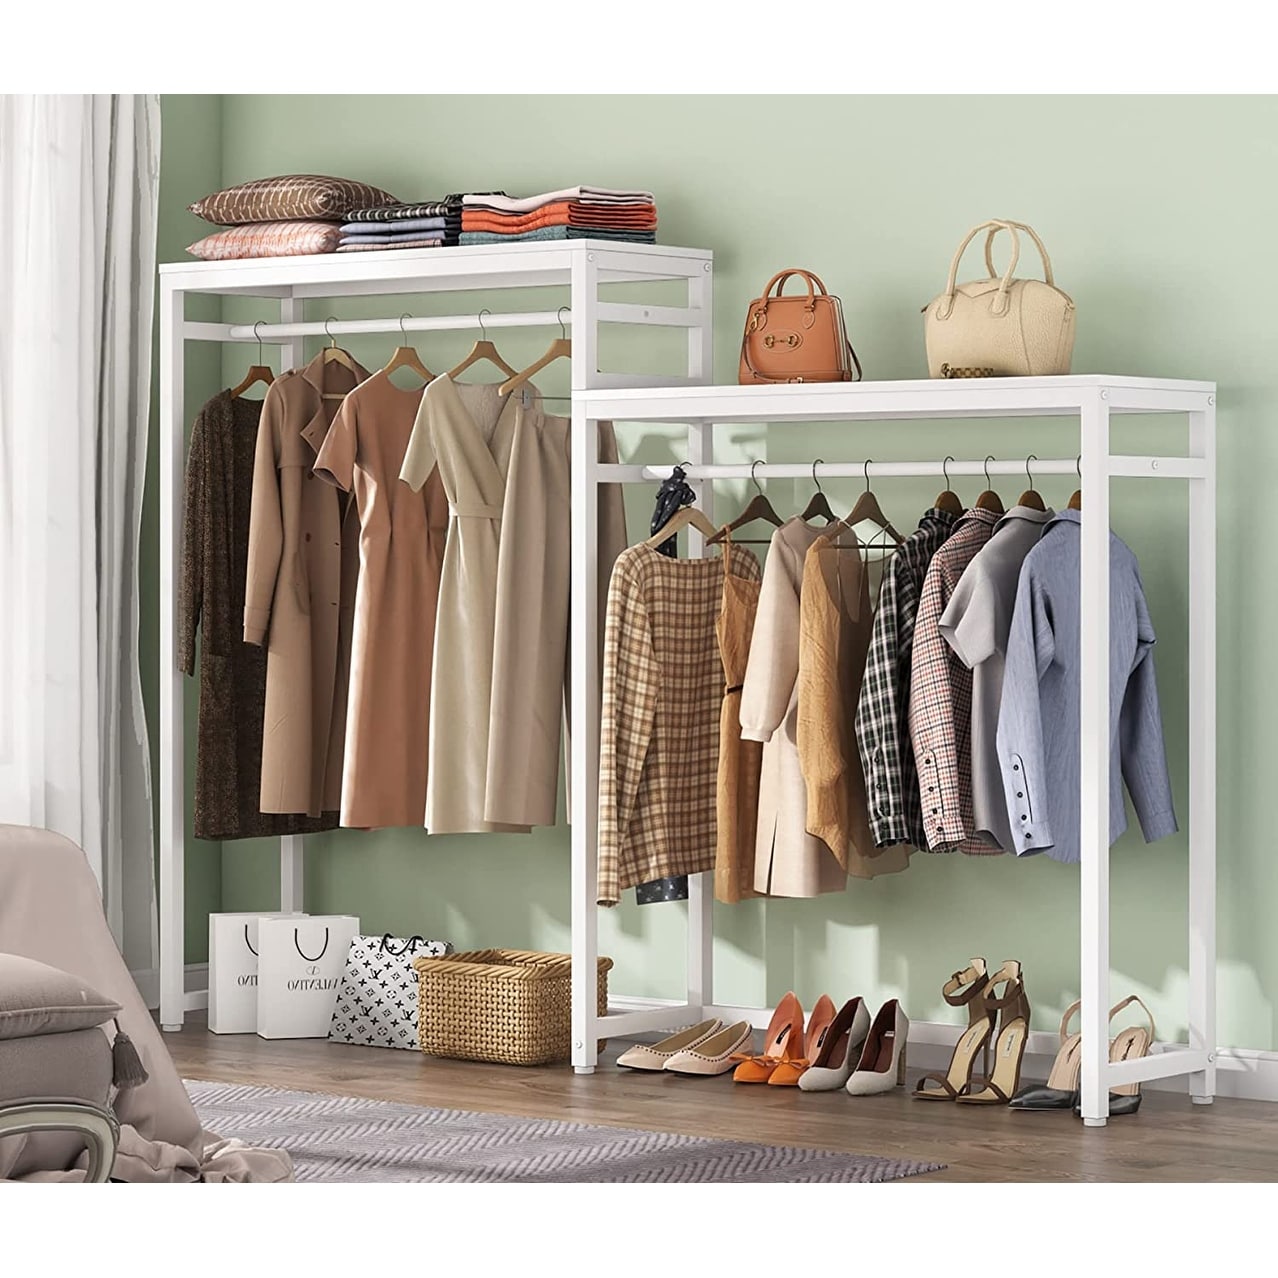 https://ak1.ostkcdn.com/images/products/is/images/direct/2af48da6e73ac2a2e0a2c34213291f79cc778995/Tribesigns-Free-Standing-Closet-Organizer%2C-Clothes-Garment-Racks-with-Storage-Shelves-and-Double-Hanging-Rod.jpg